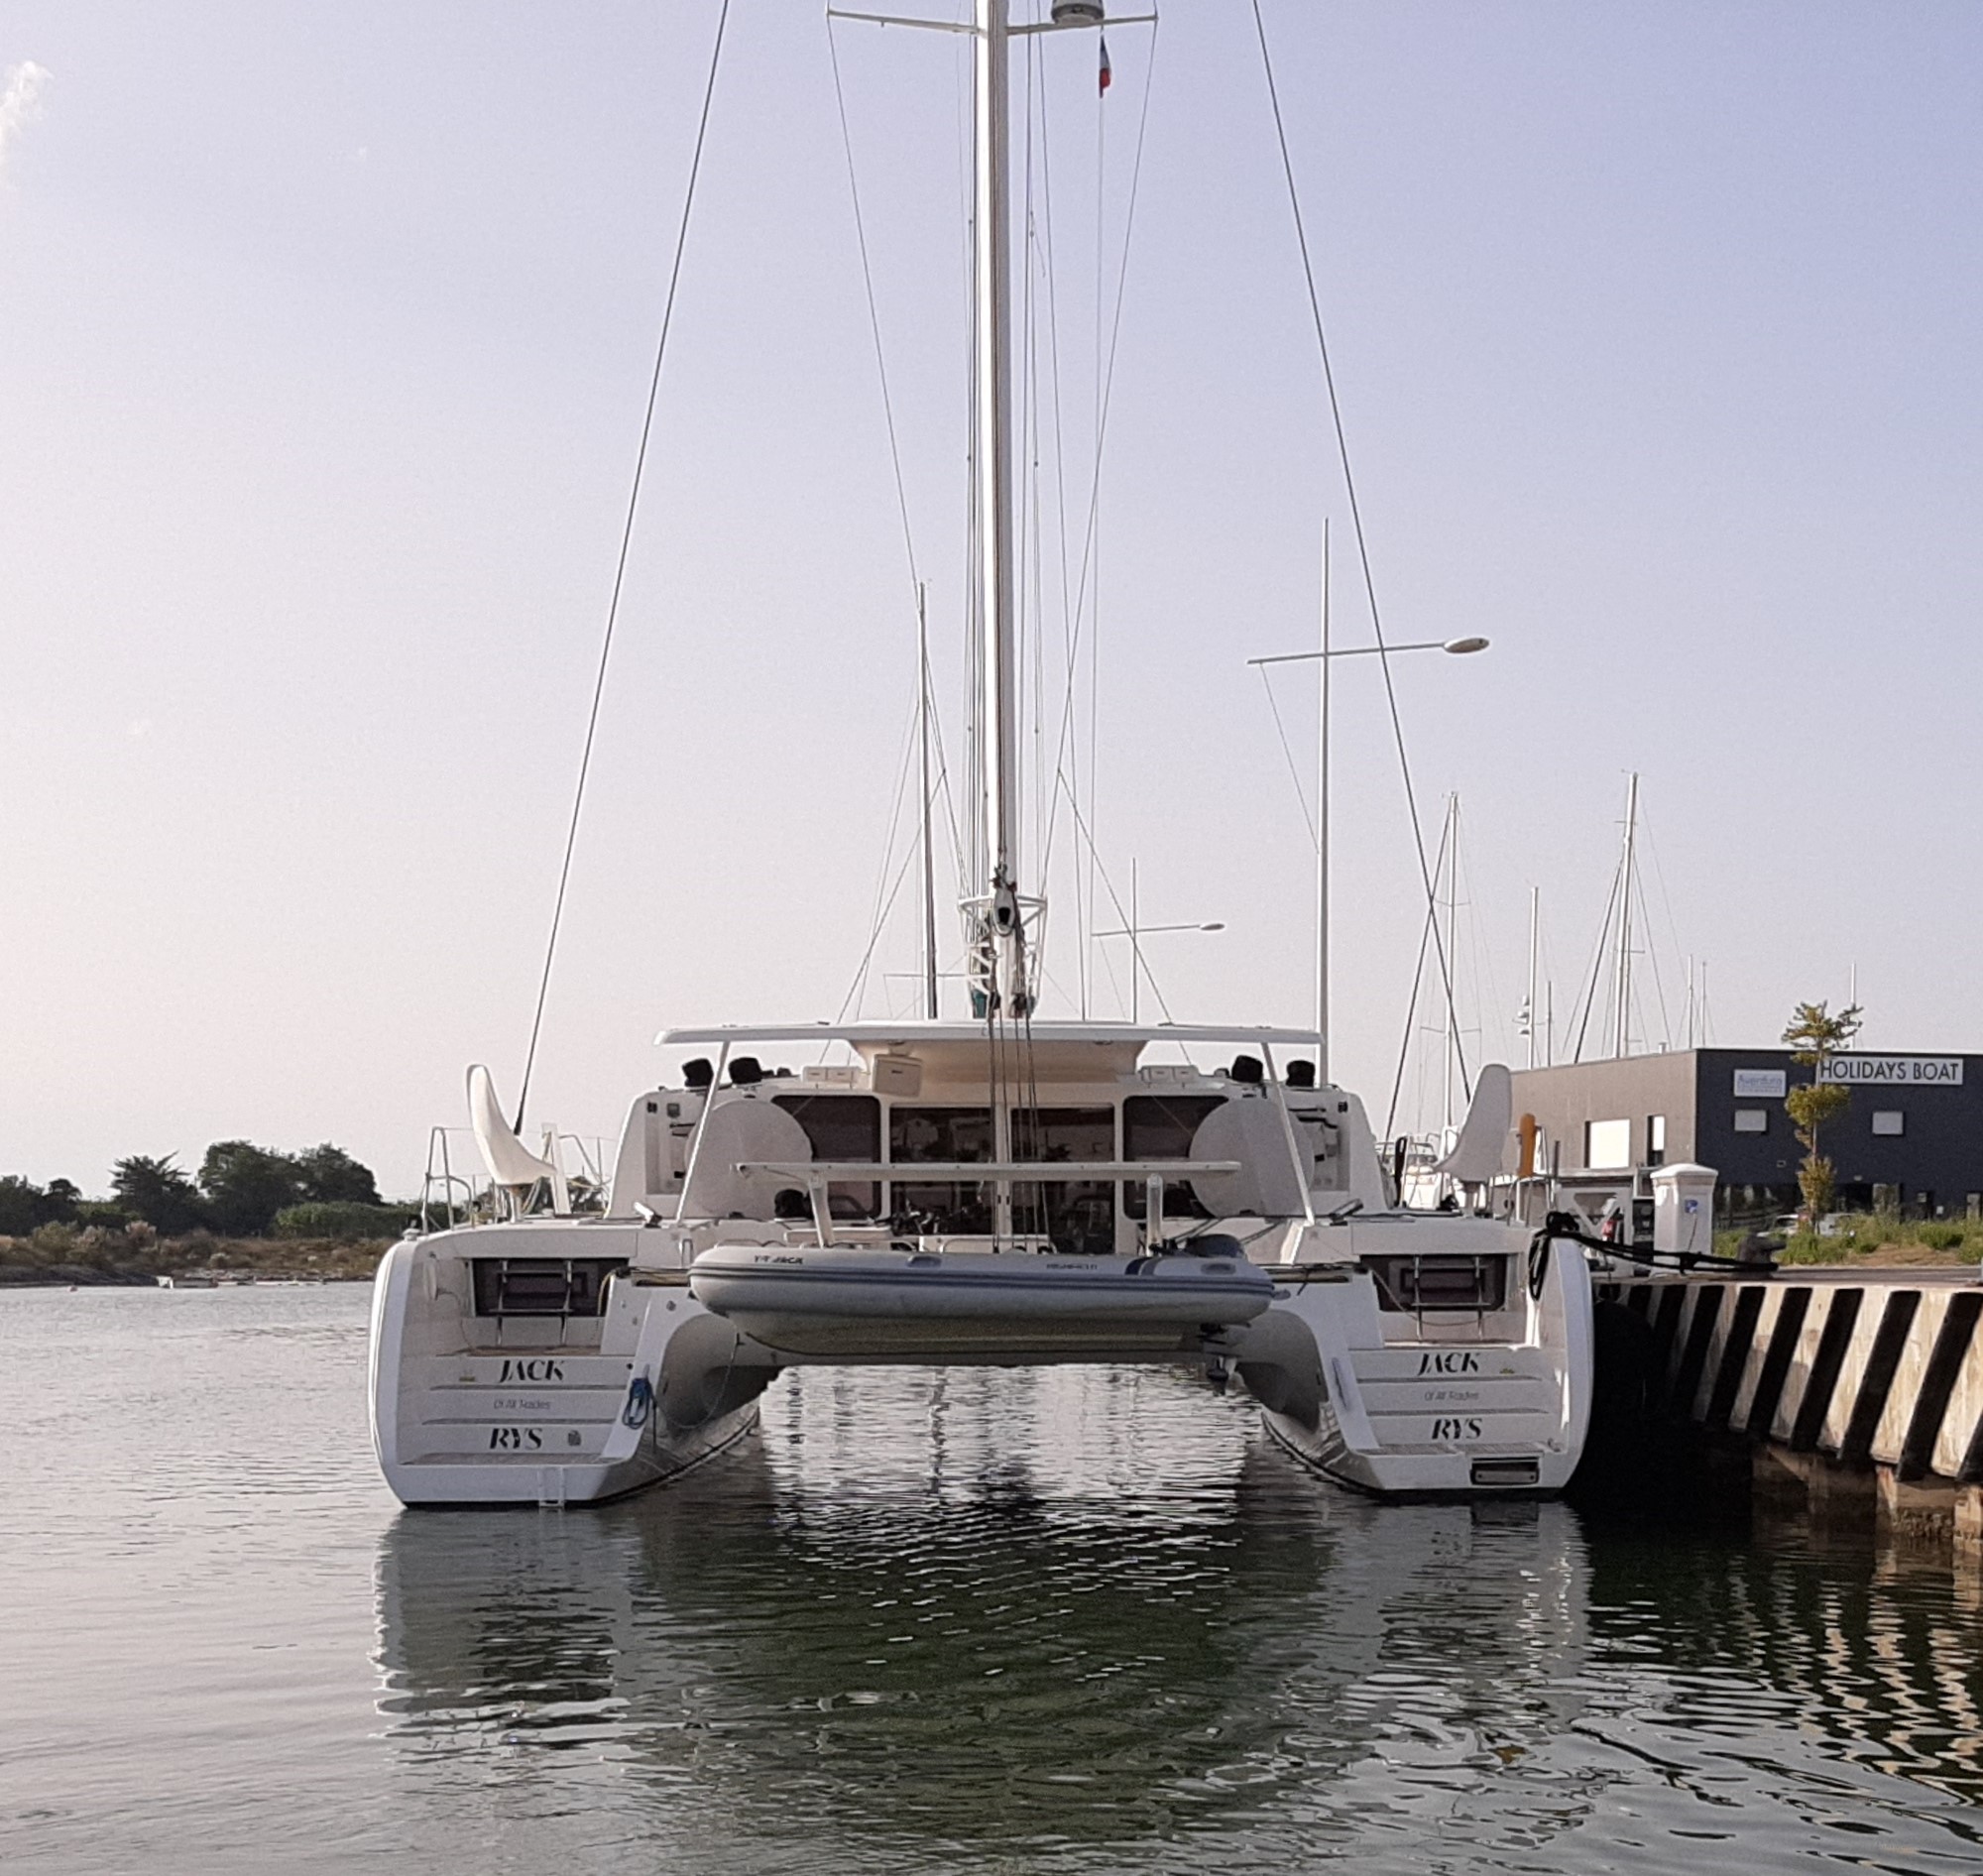 Outremer 5X